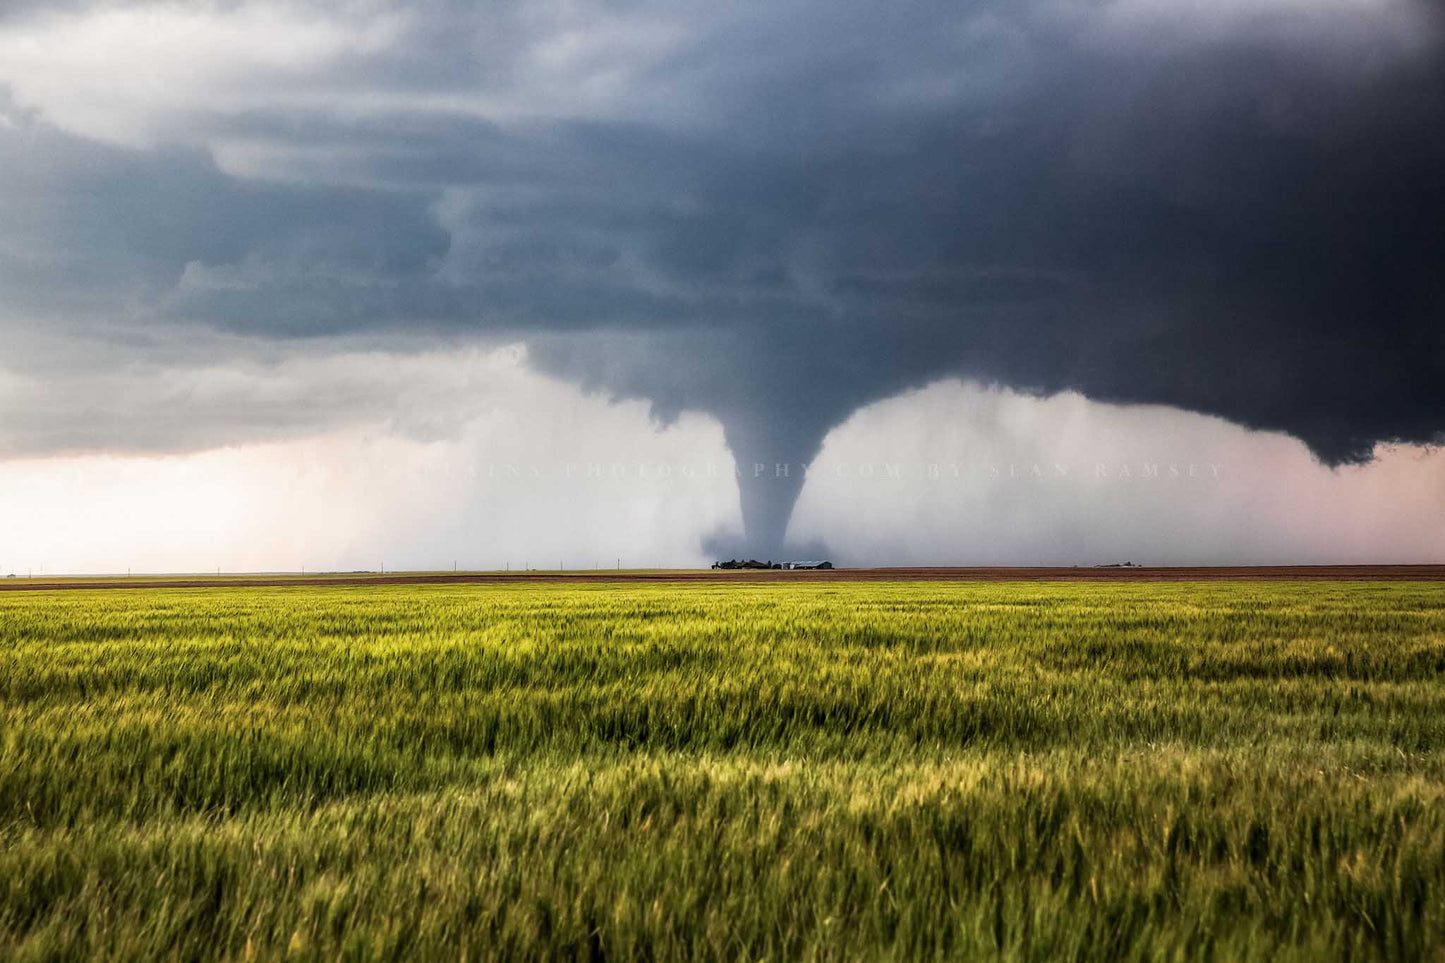 Storm photography print of a large tornado over a wheat field passing behind a farmhouse on a stormy spring day in Kansas by Sean Ramsey of Southern Plains Photography.